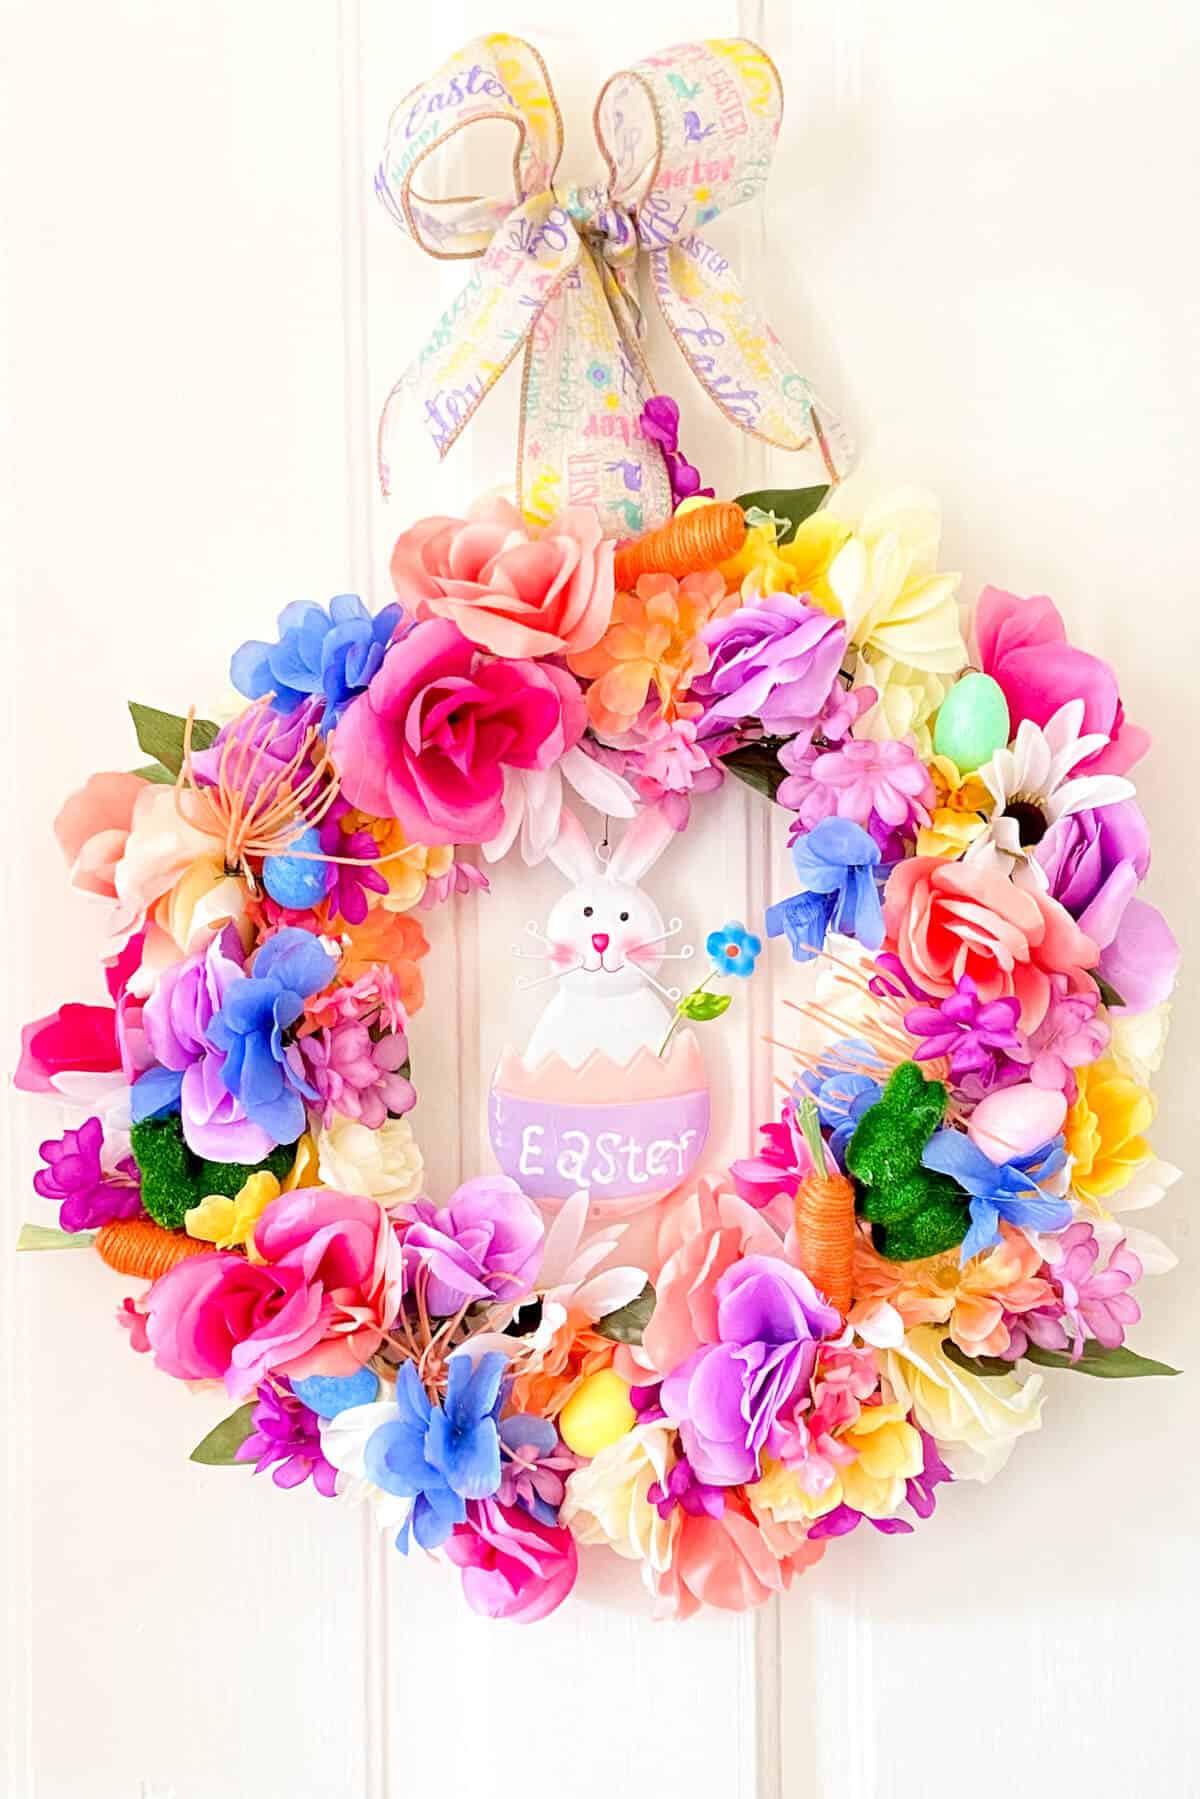 Finished easter wreath.